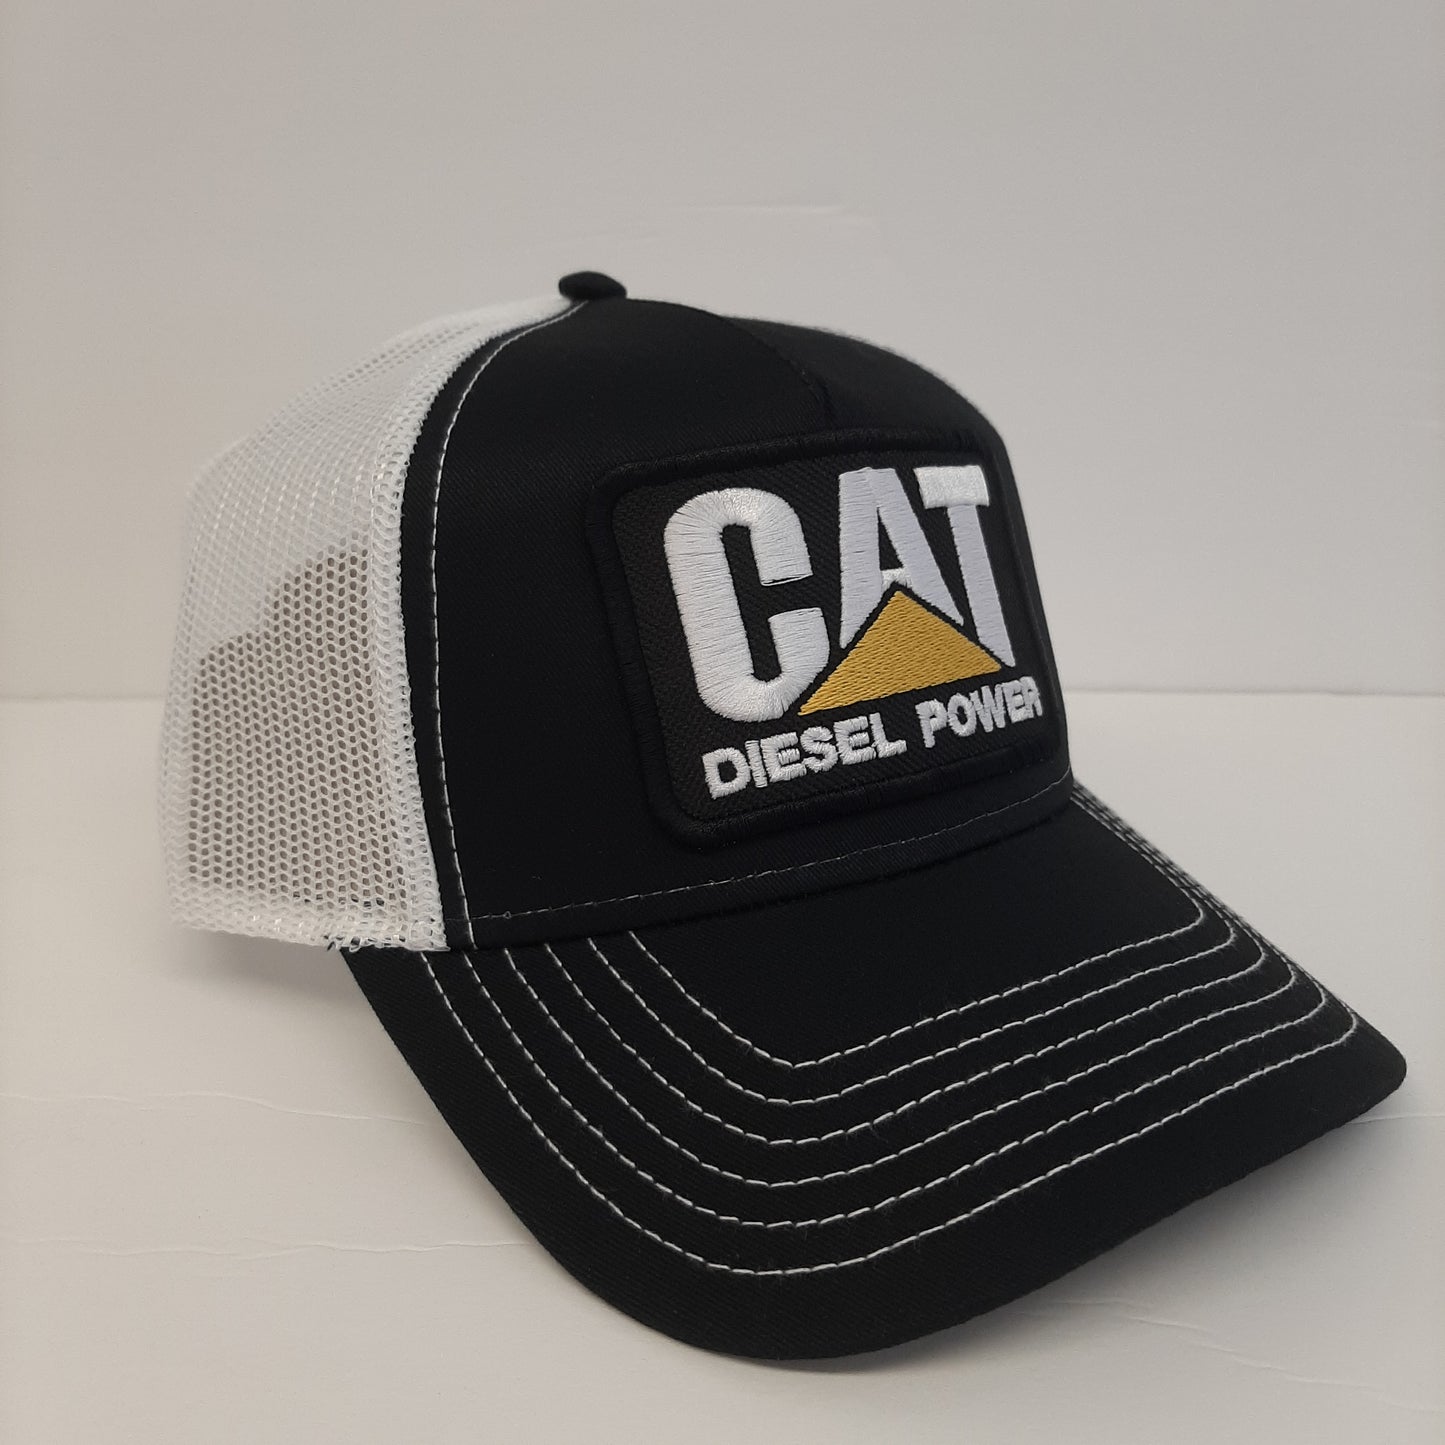 Otto Retro Cat Diesel Power Embroidered Patch Curved Bill Trucker Mesh Snapback Cap